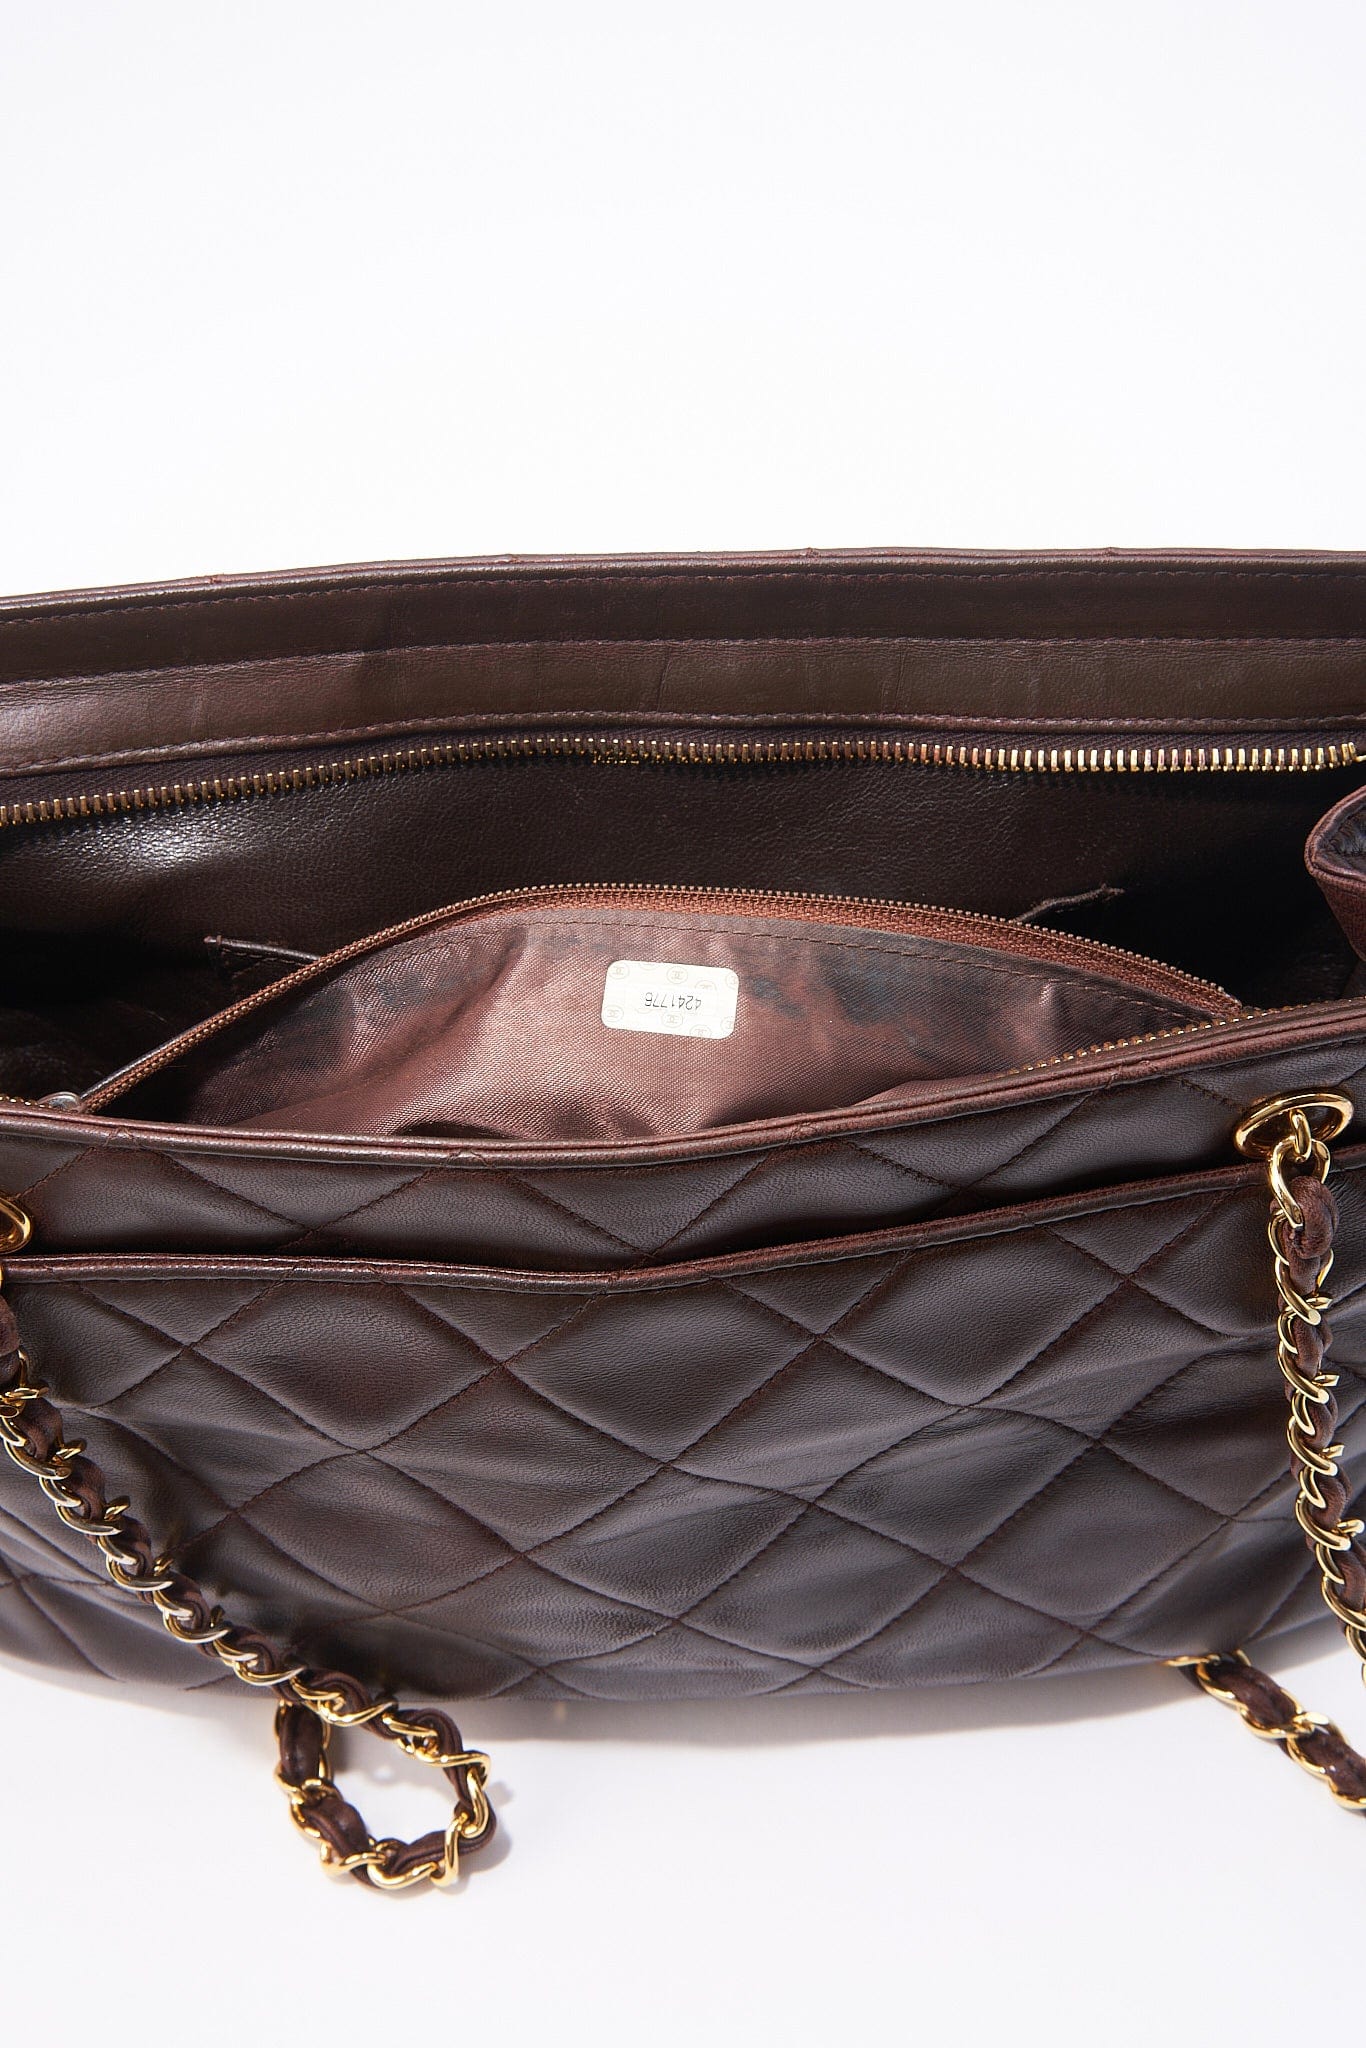 Vintage Chanel Brown Leather Shoulder Bag with Double Chain Handle